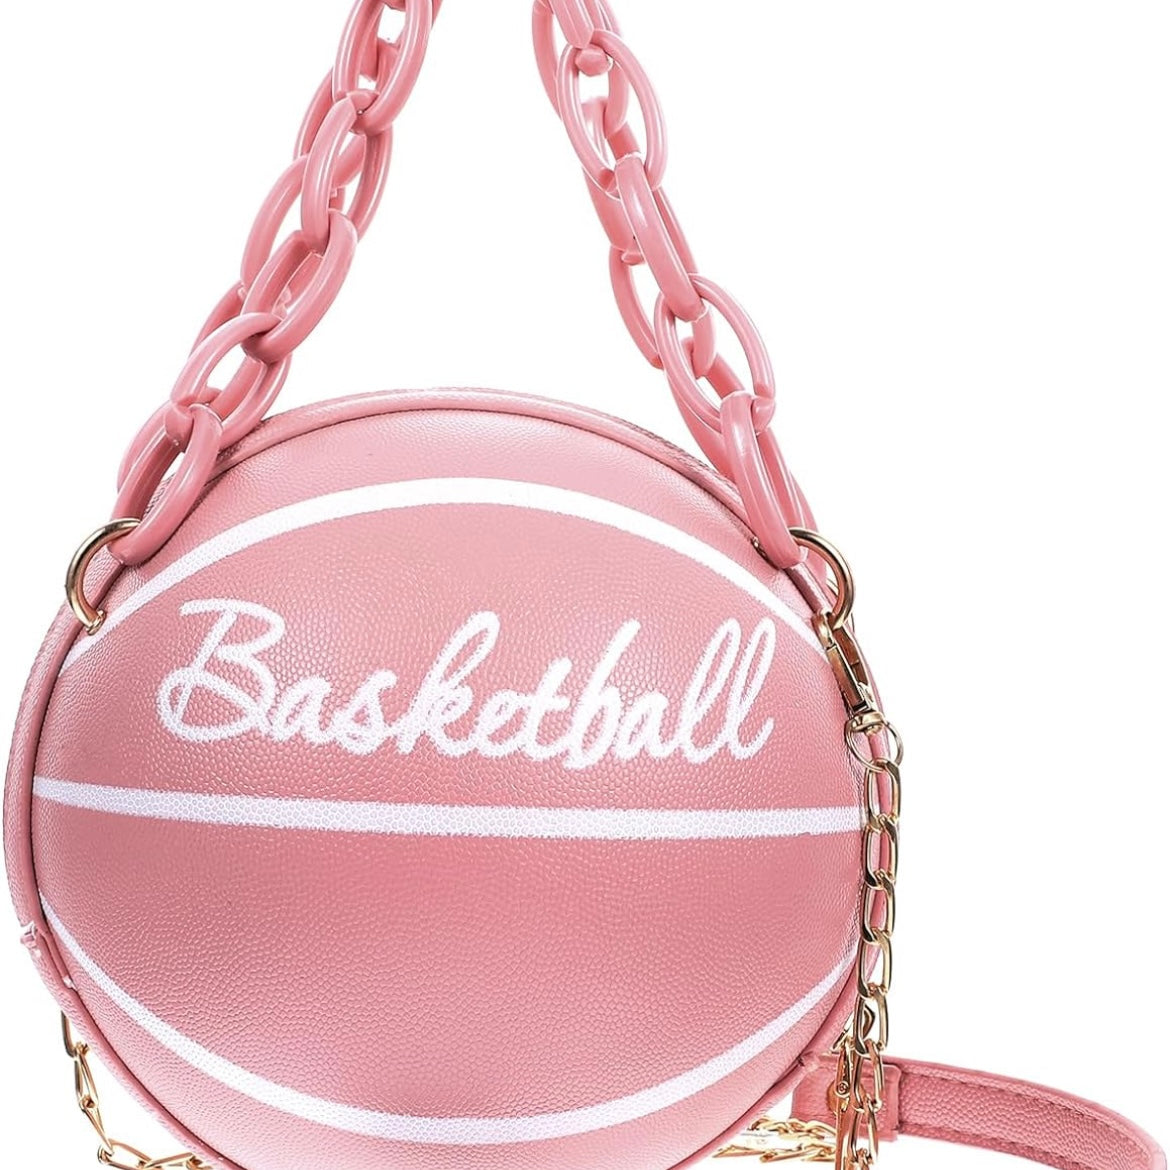 Most Wanted Holiday Cross Body Leather Basketball Bag W/ CZ Gold Chain Or Other Style, Several Colors Available